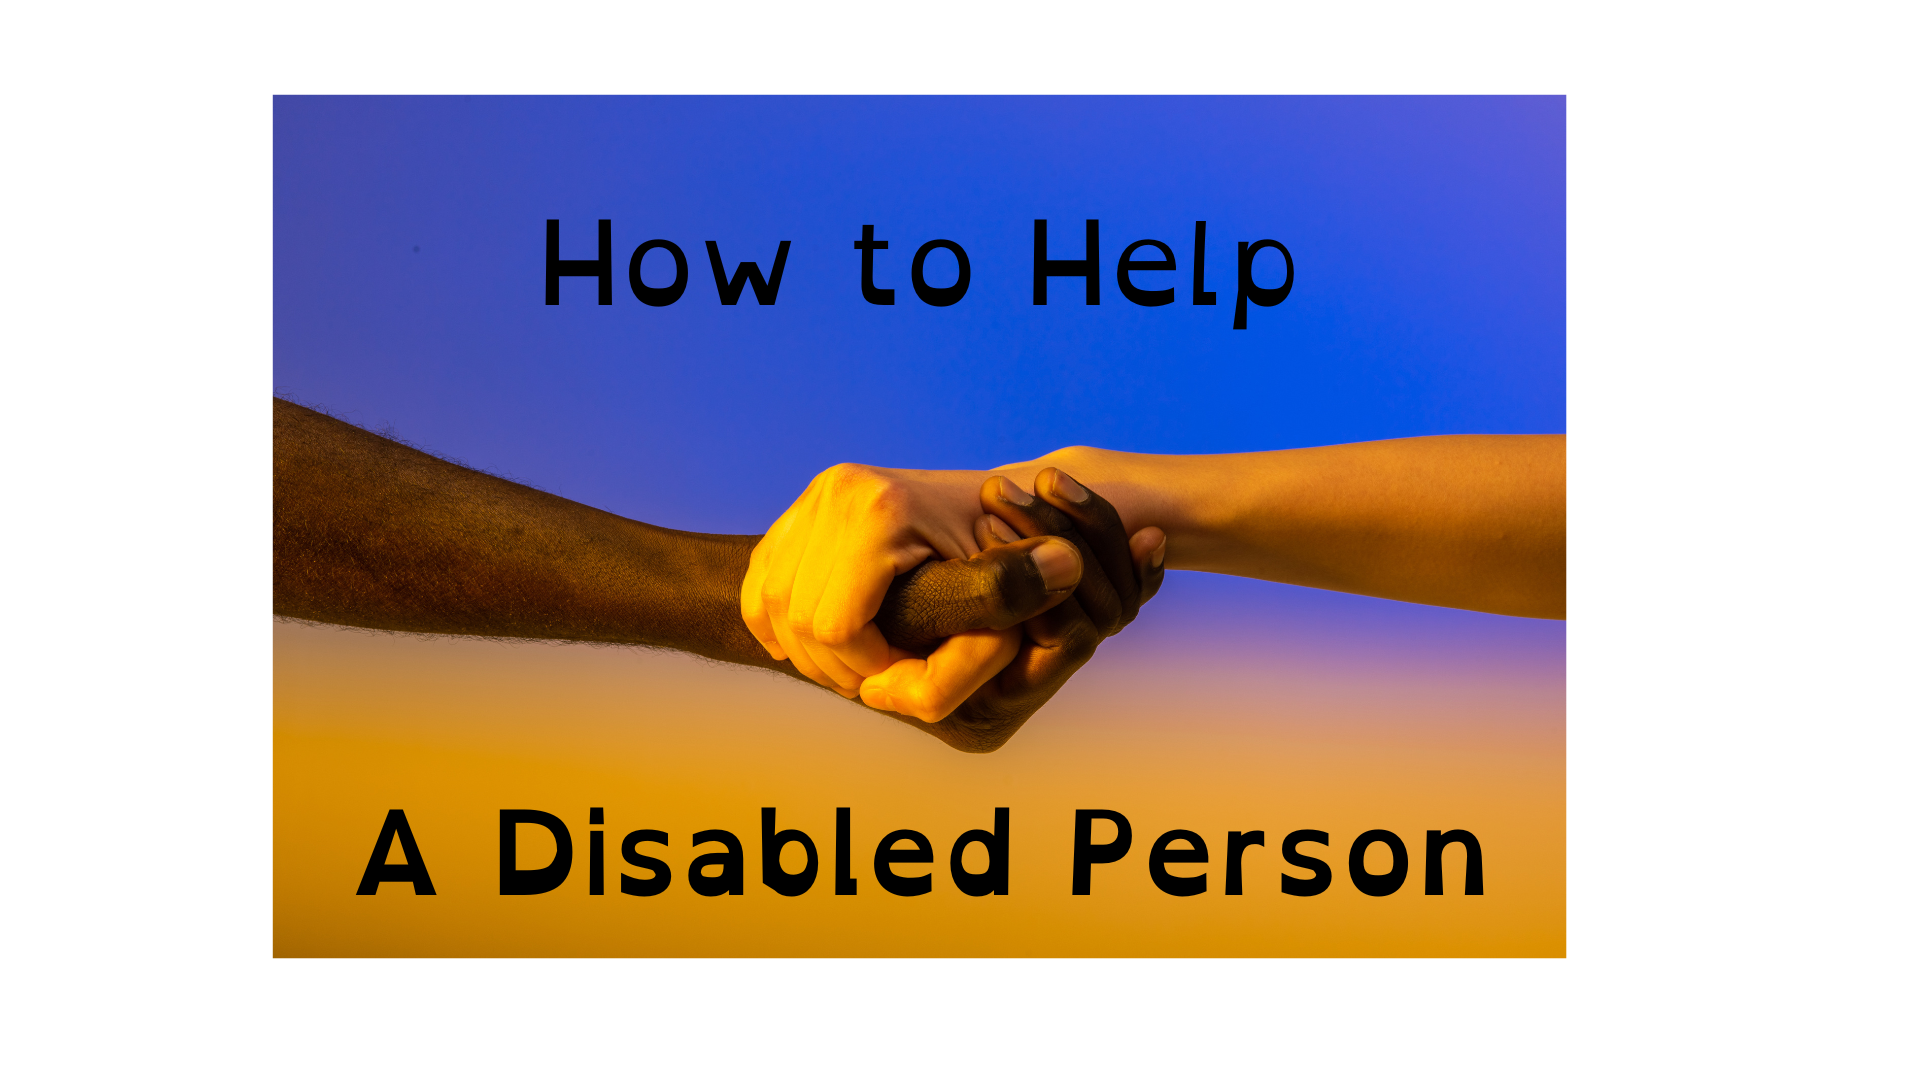 My Friend Has A Disability, How Can I Help?